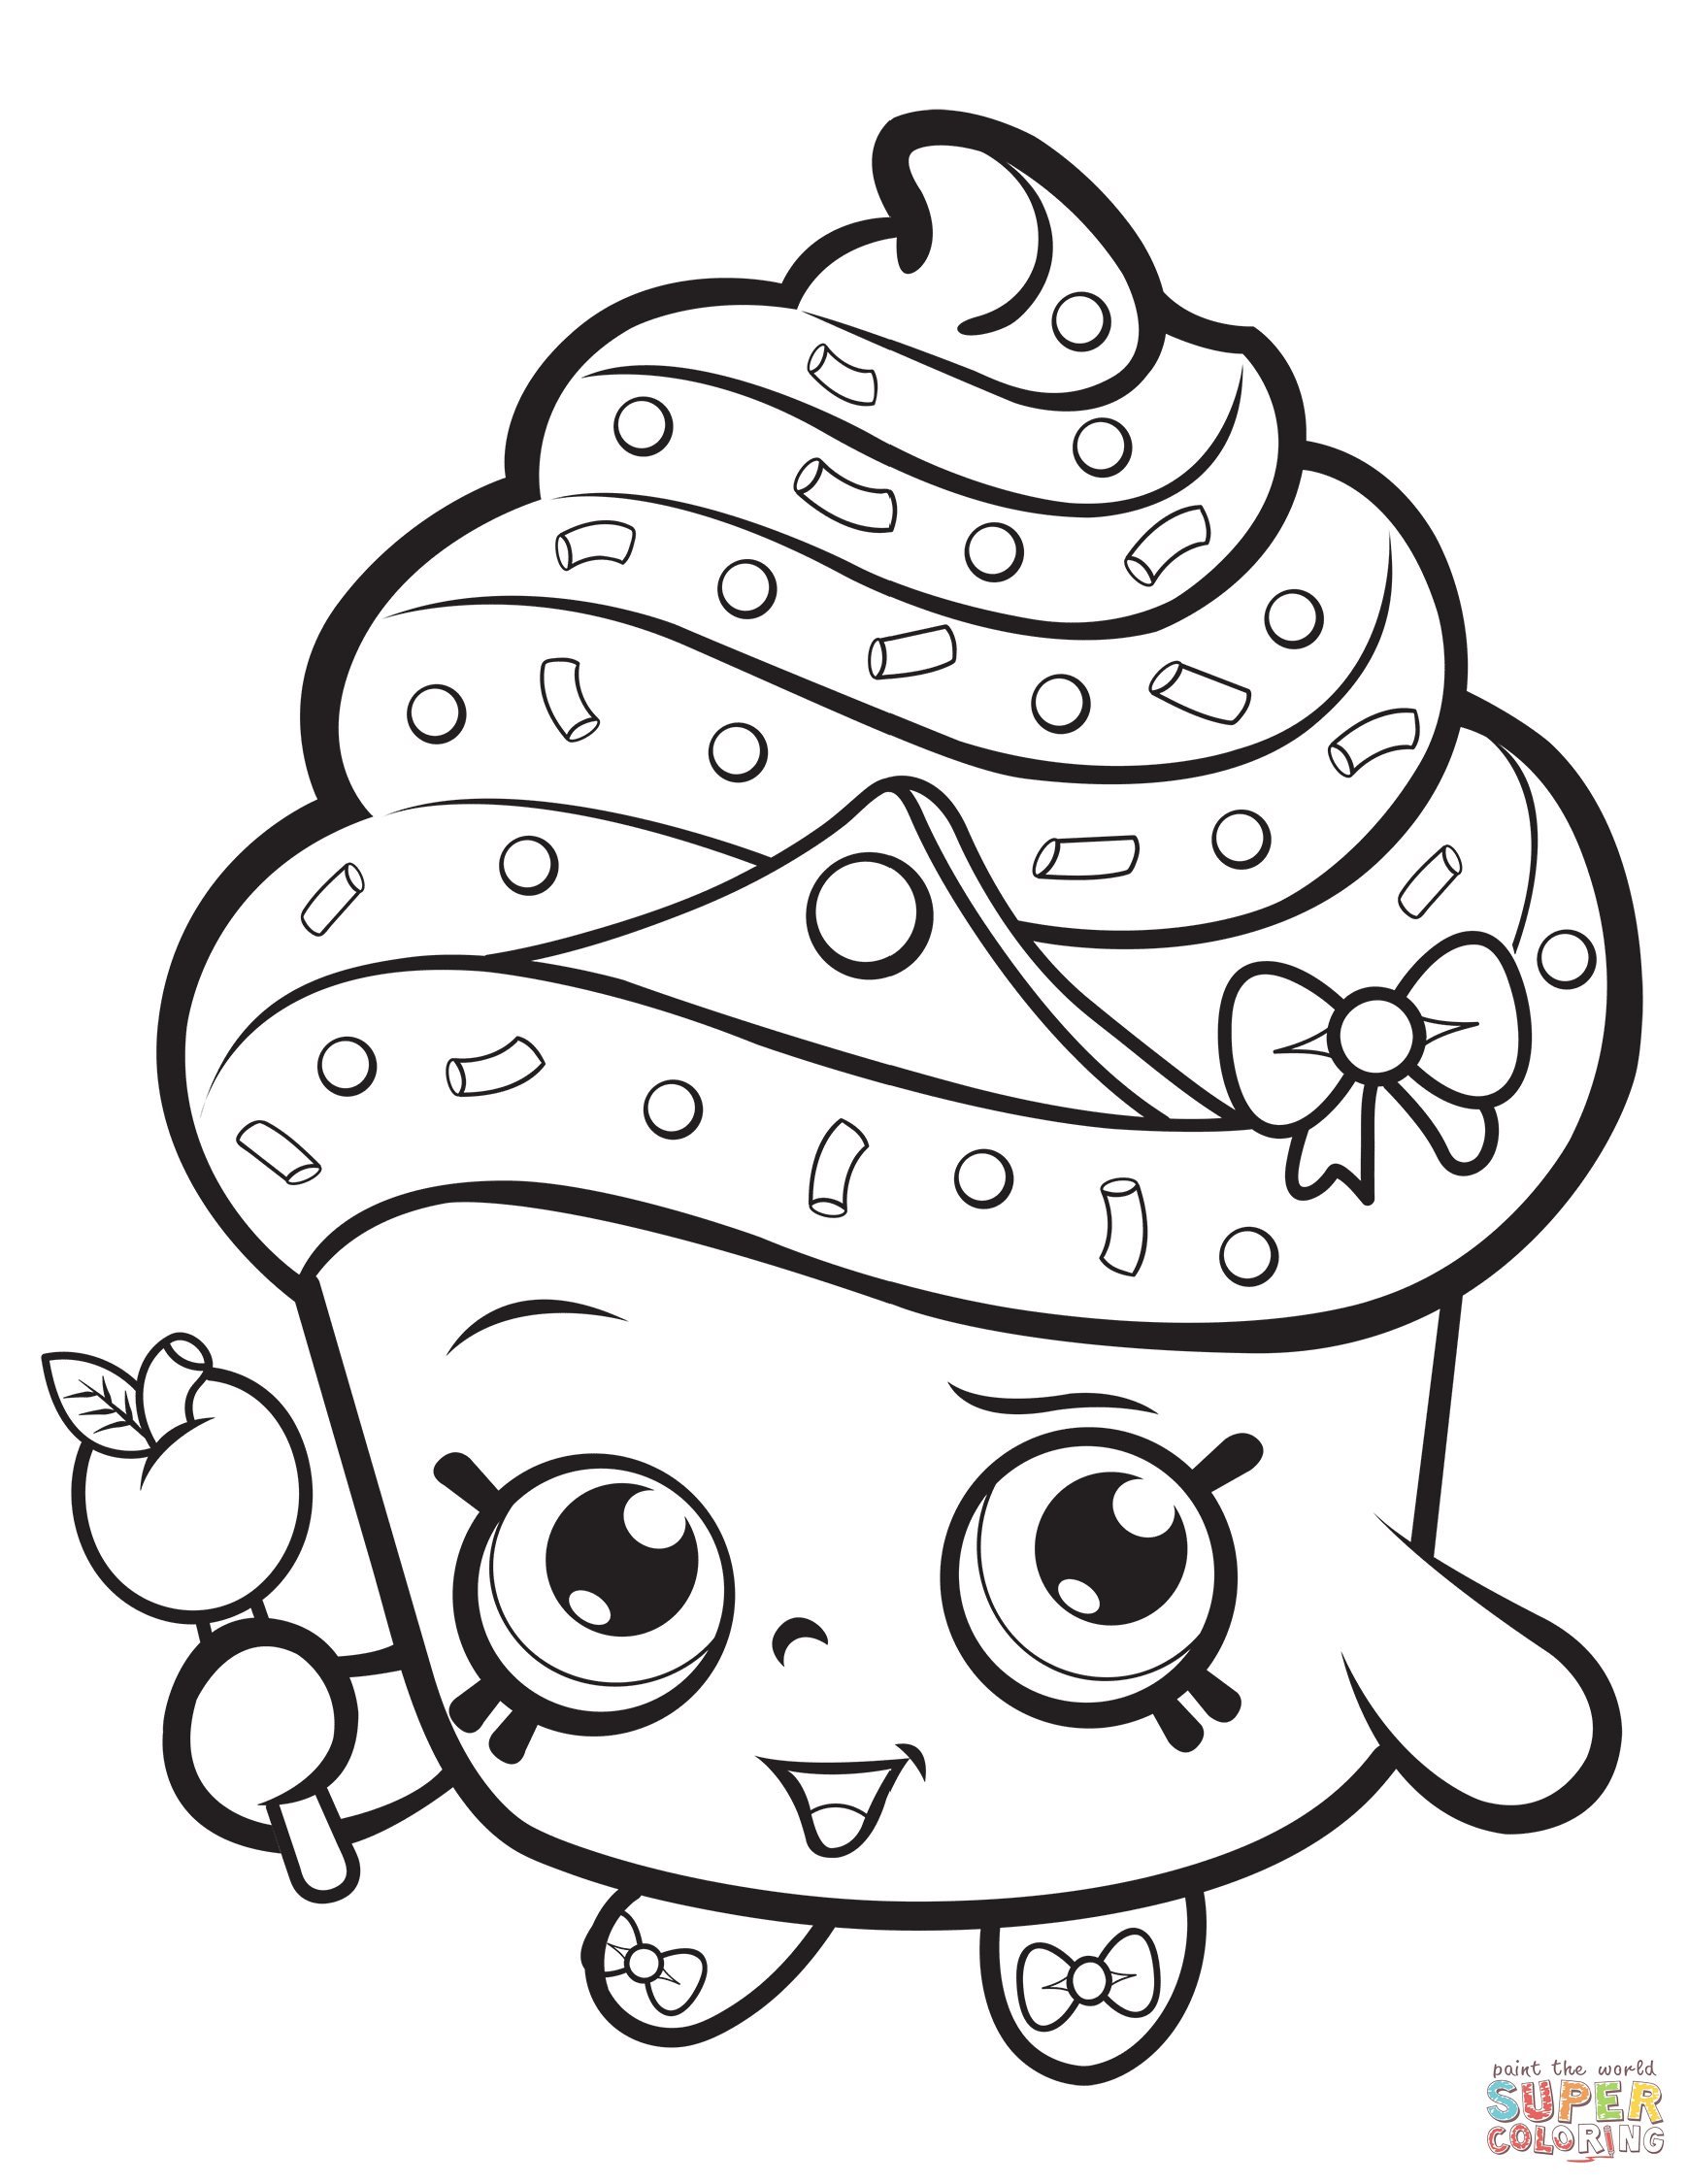 Cupcake Queen Shopkin Coloring Page   Free Printable Coloring ...